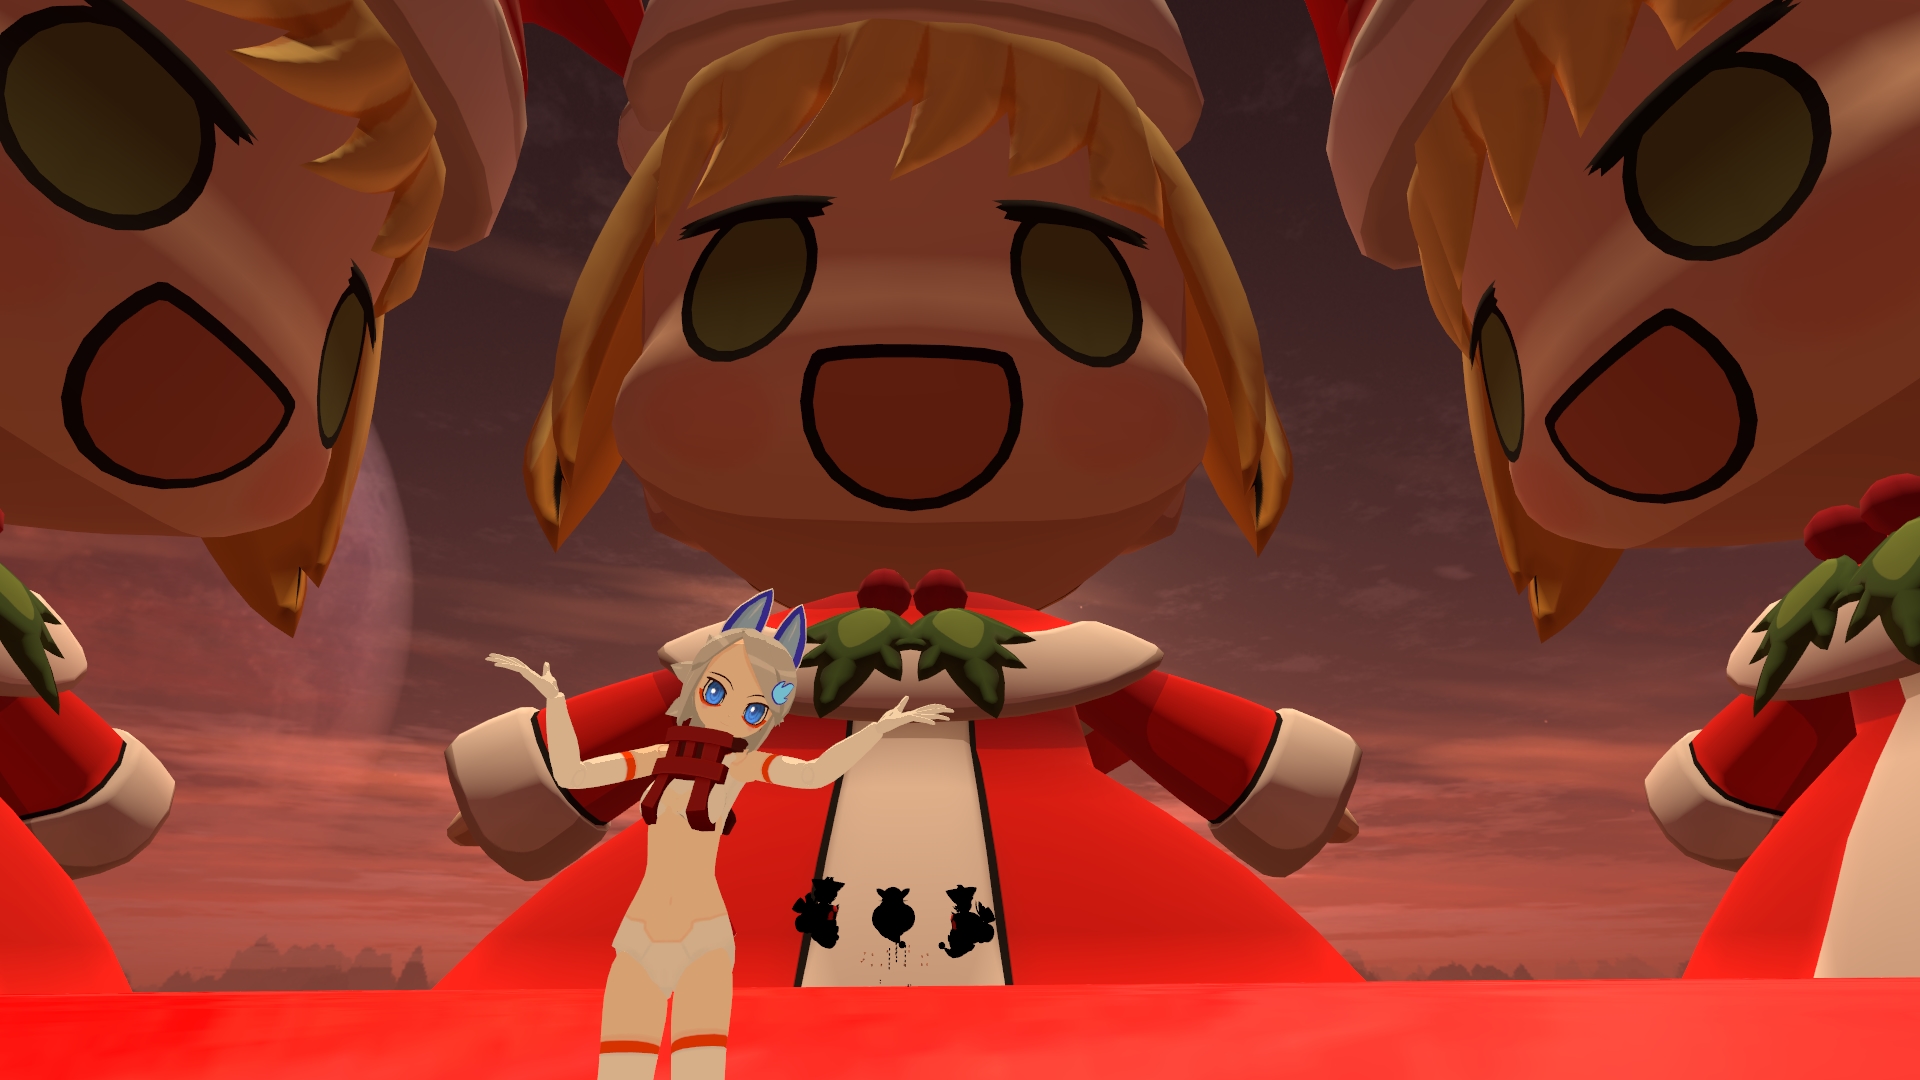 Altier on X: Alongside the update for my Chao World in VRChat, I